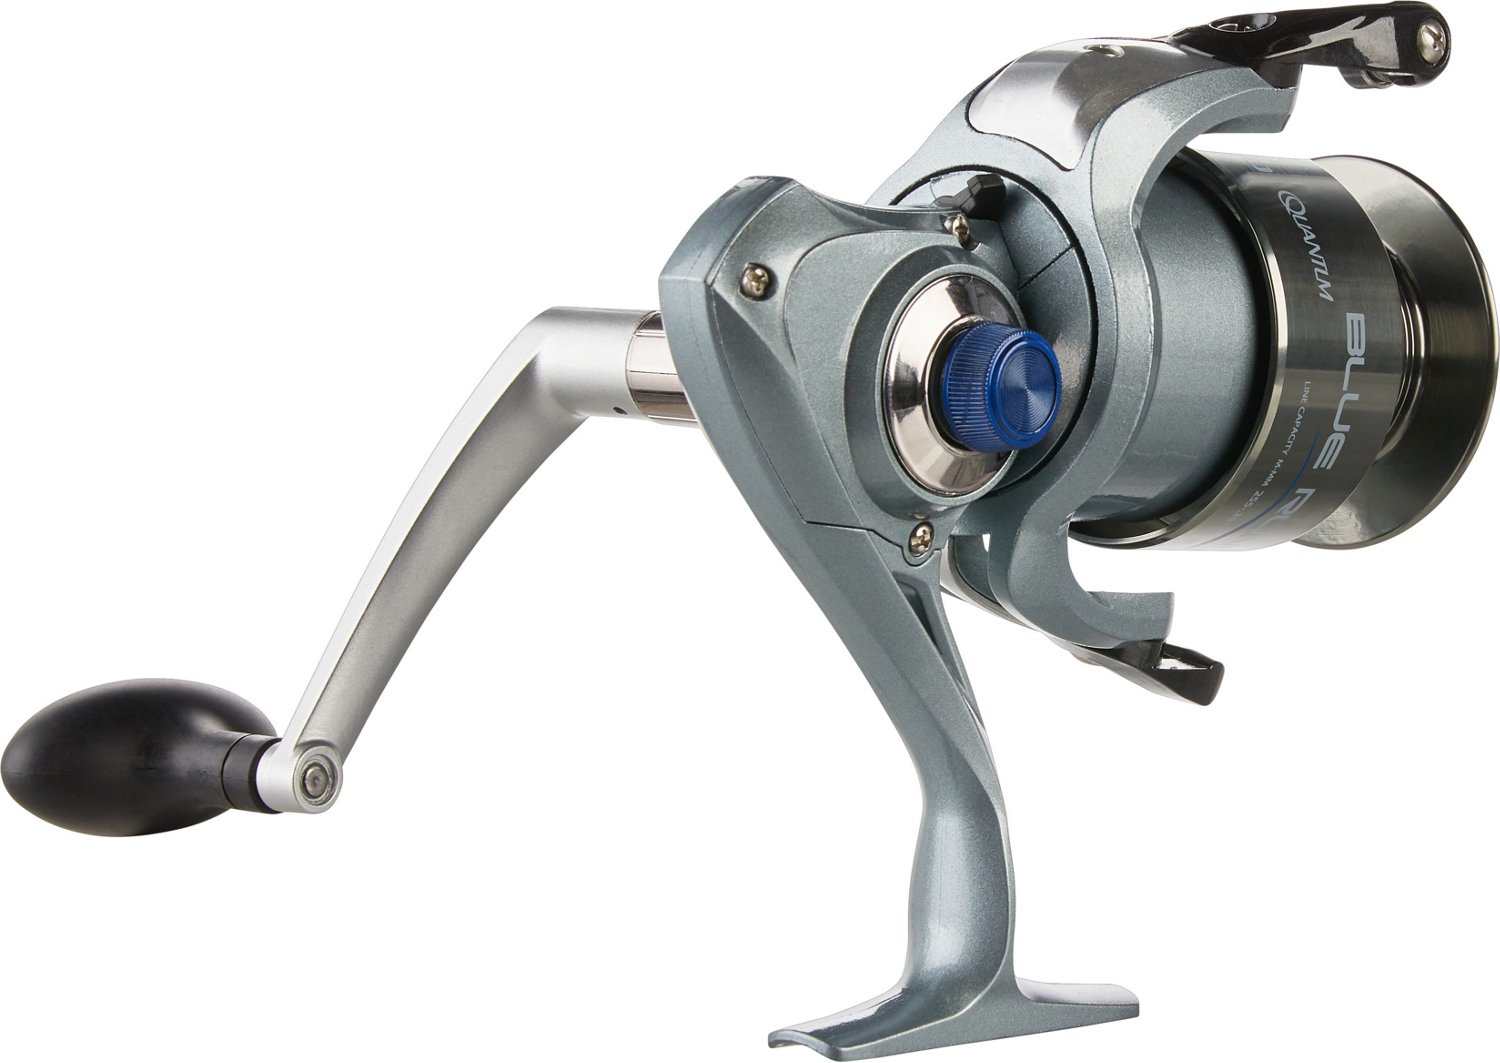  Quantum Blue Runner Spinning Fishing Reel, Size 40 Reel,  Changeable Right- or Left-Hand Retrieve, Lightweight Composite Body, TRU  Balance Rotor, 5.2:1 Gear Ratio, Blue, Clam Packaging : Sports & Outdoors